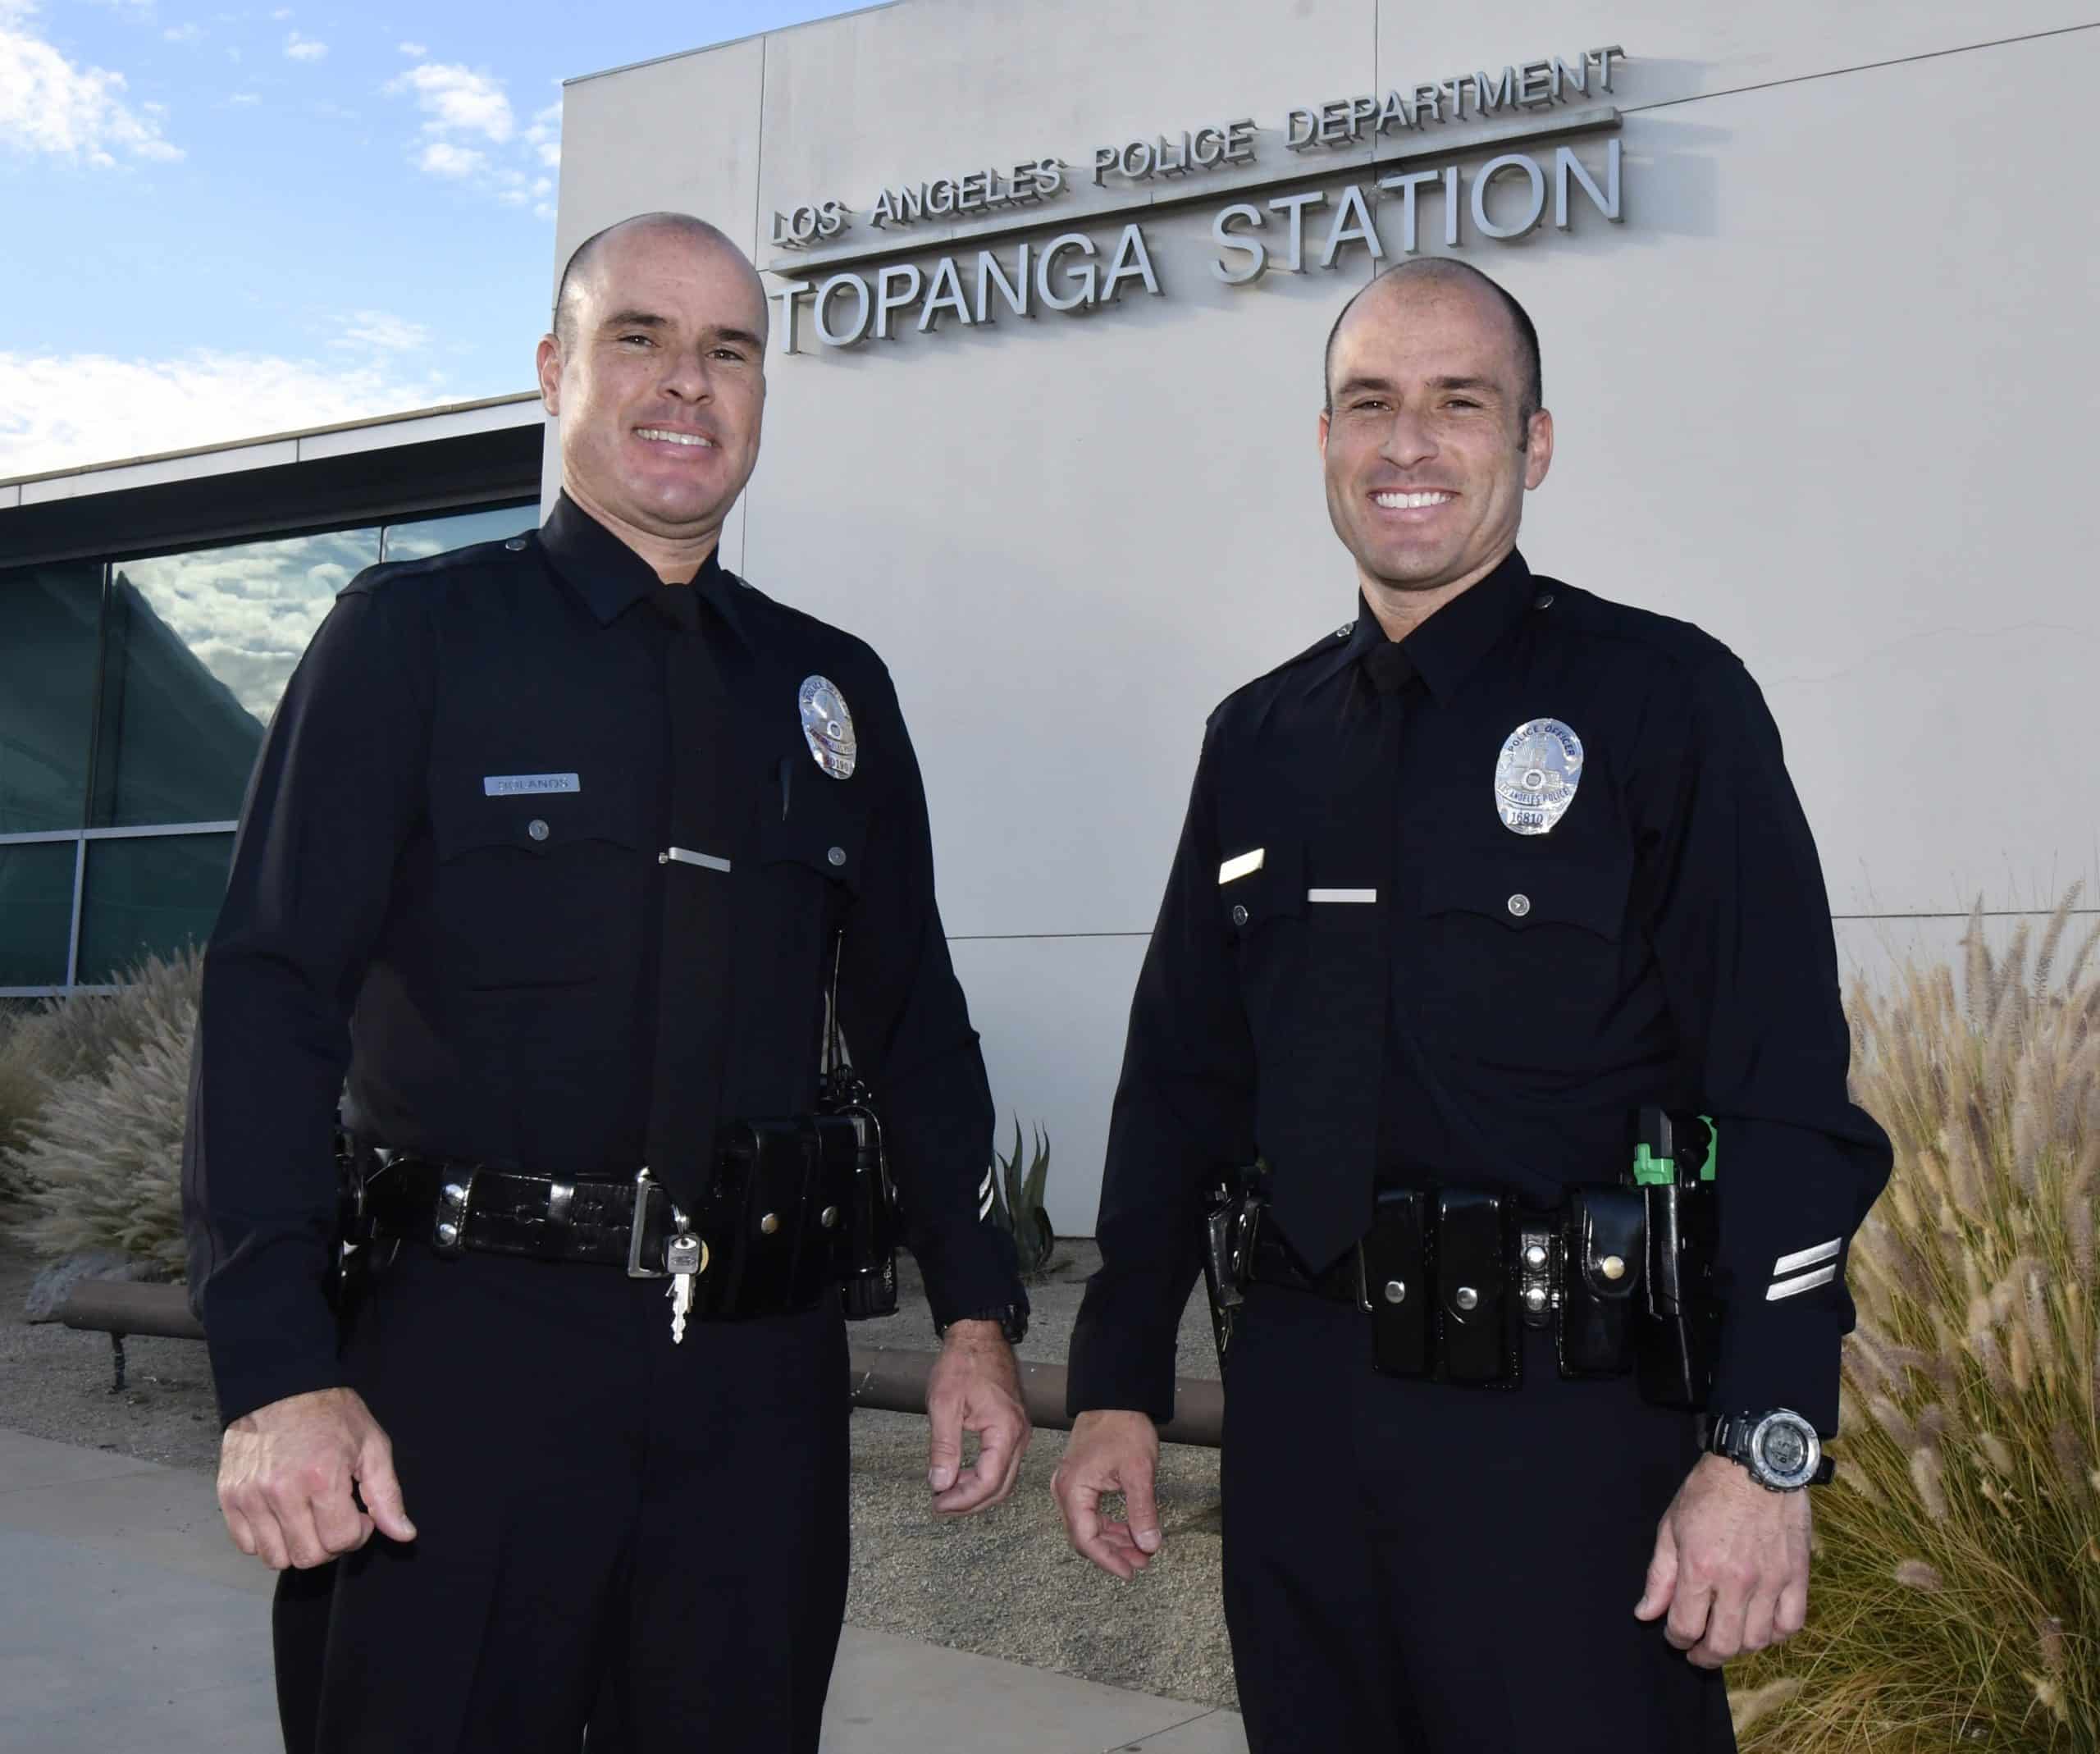 Two LAPD patrol officers share night shift duties and more: Theyre ...